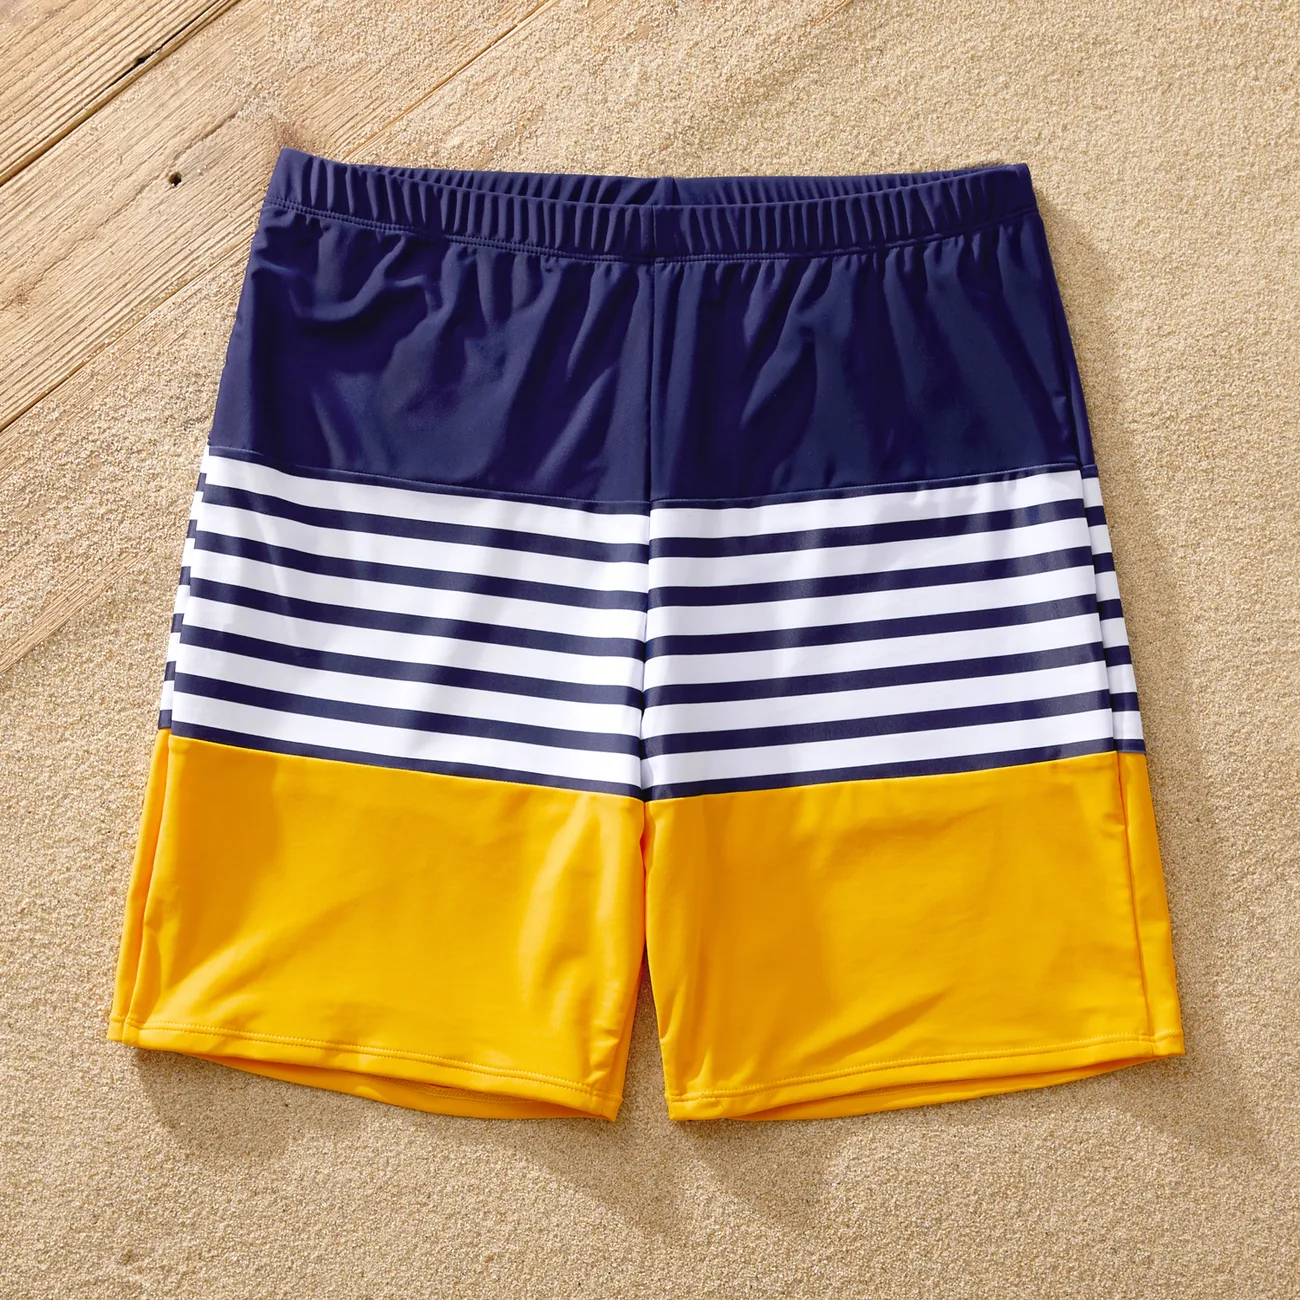 Family Matching Stripe & Colorblock Spliced One Piece Swimsuit or Swim Trunks Shorts ColorBlock big image 1